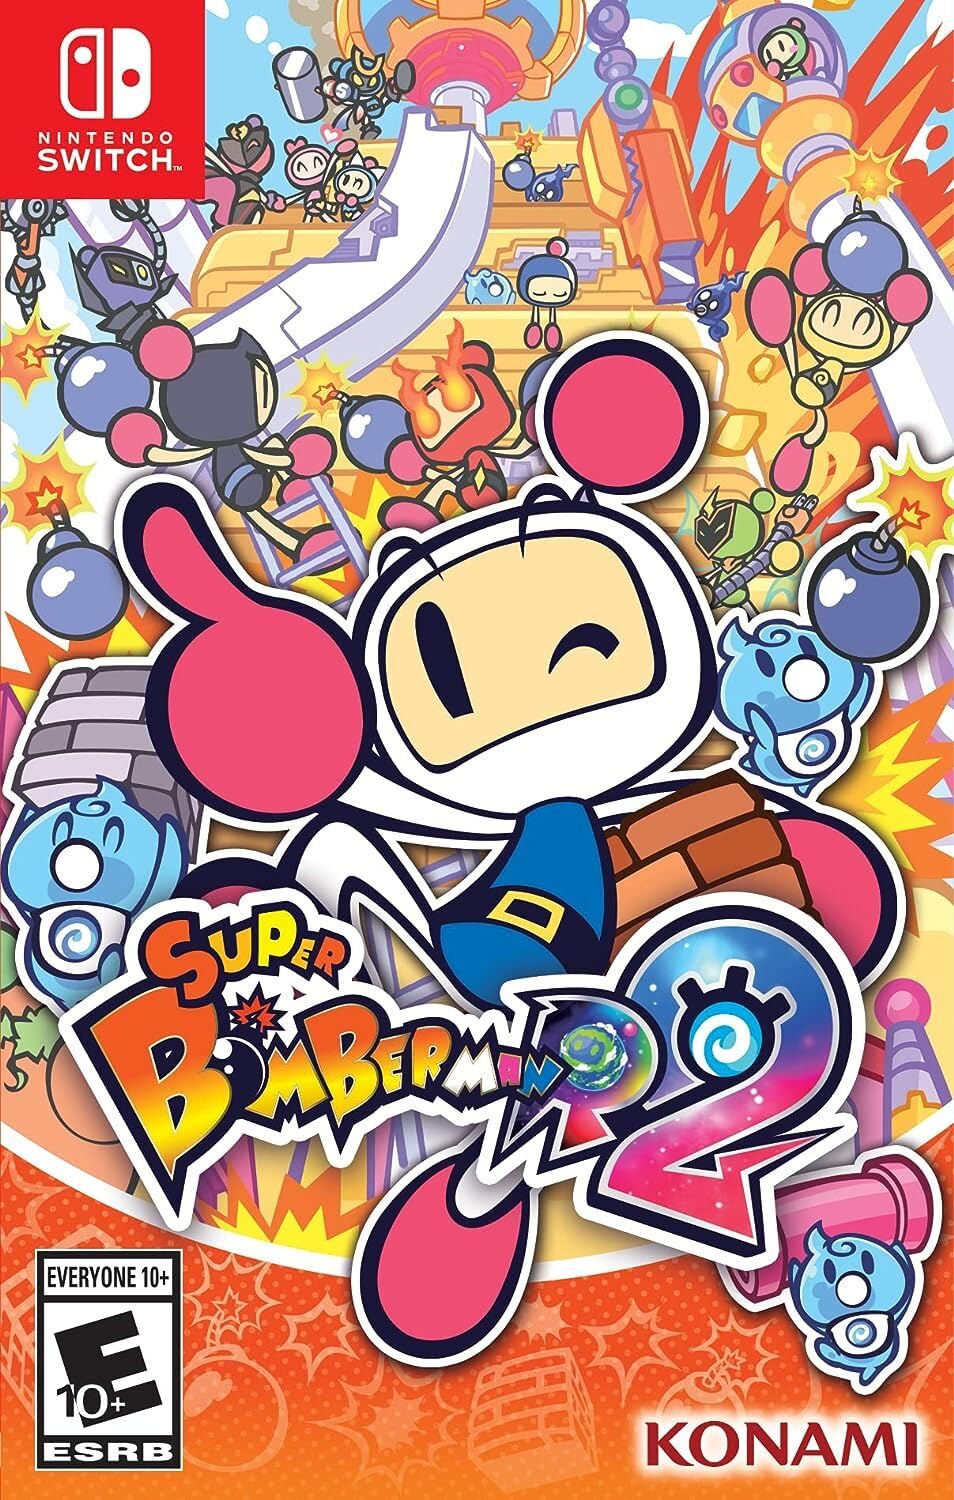 Super Bomberman R 2 (Nintendo Switch) $20 + Free Shipping w/ Prime or on $35+